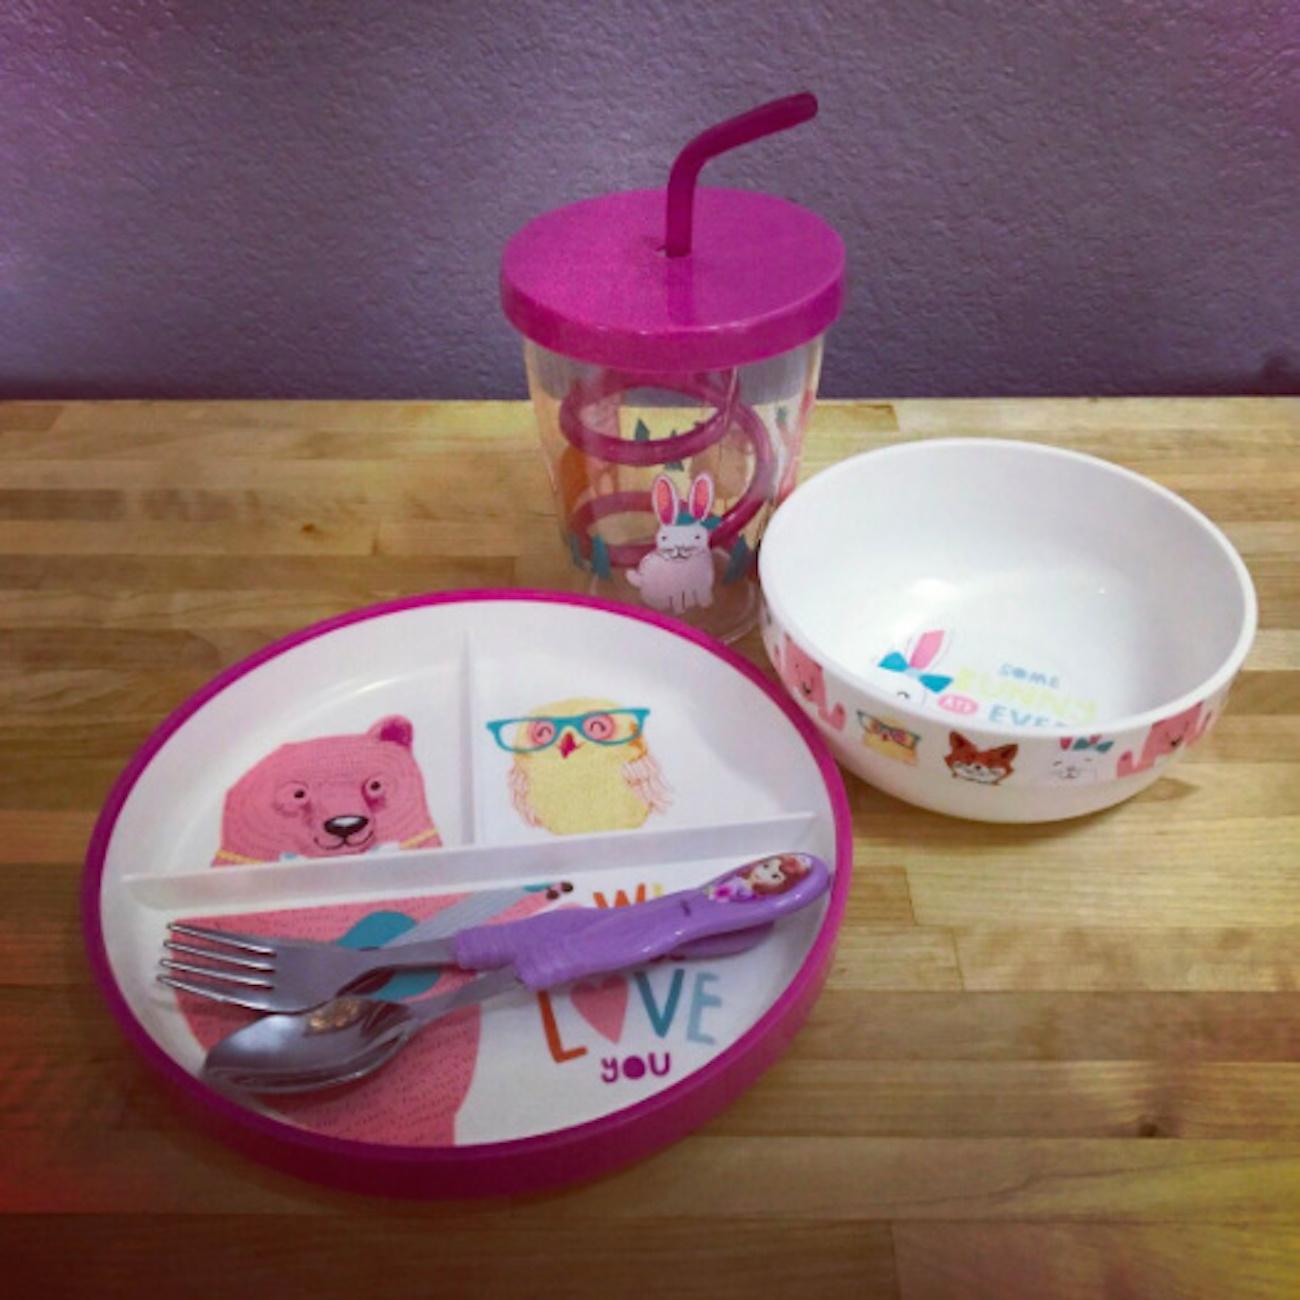 Child's plate with illustrations of animals on it, plus matching bowl, cup with a straw and eating utensils